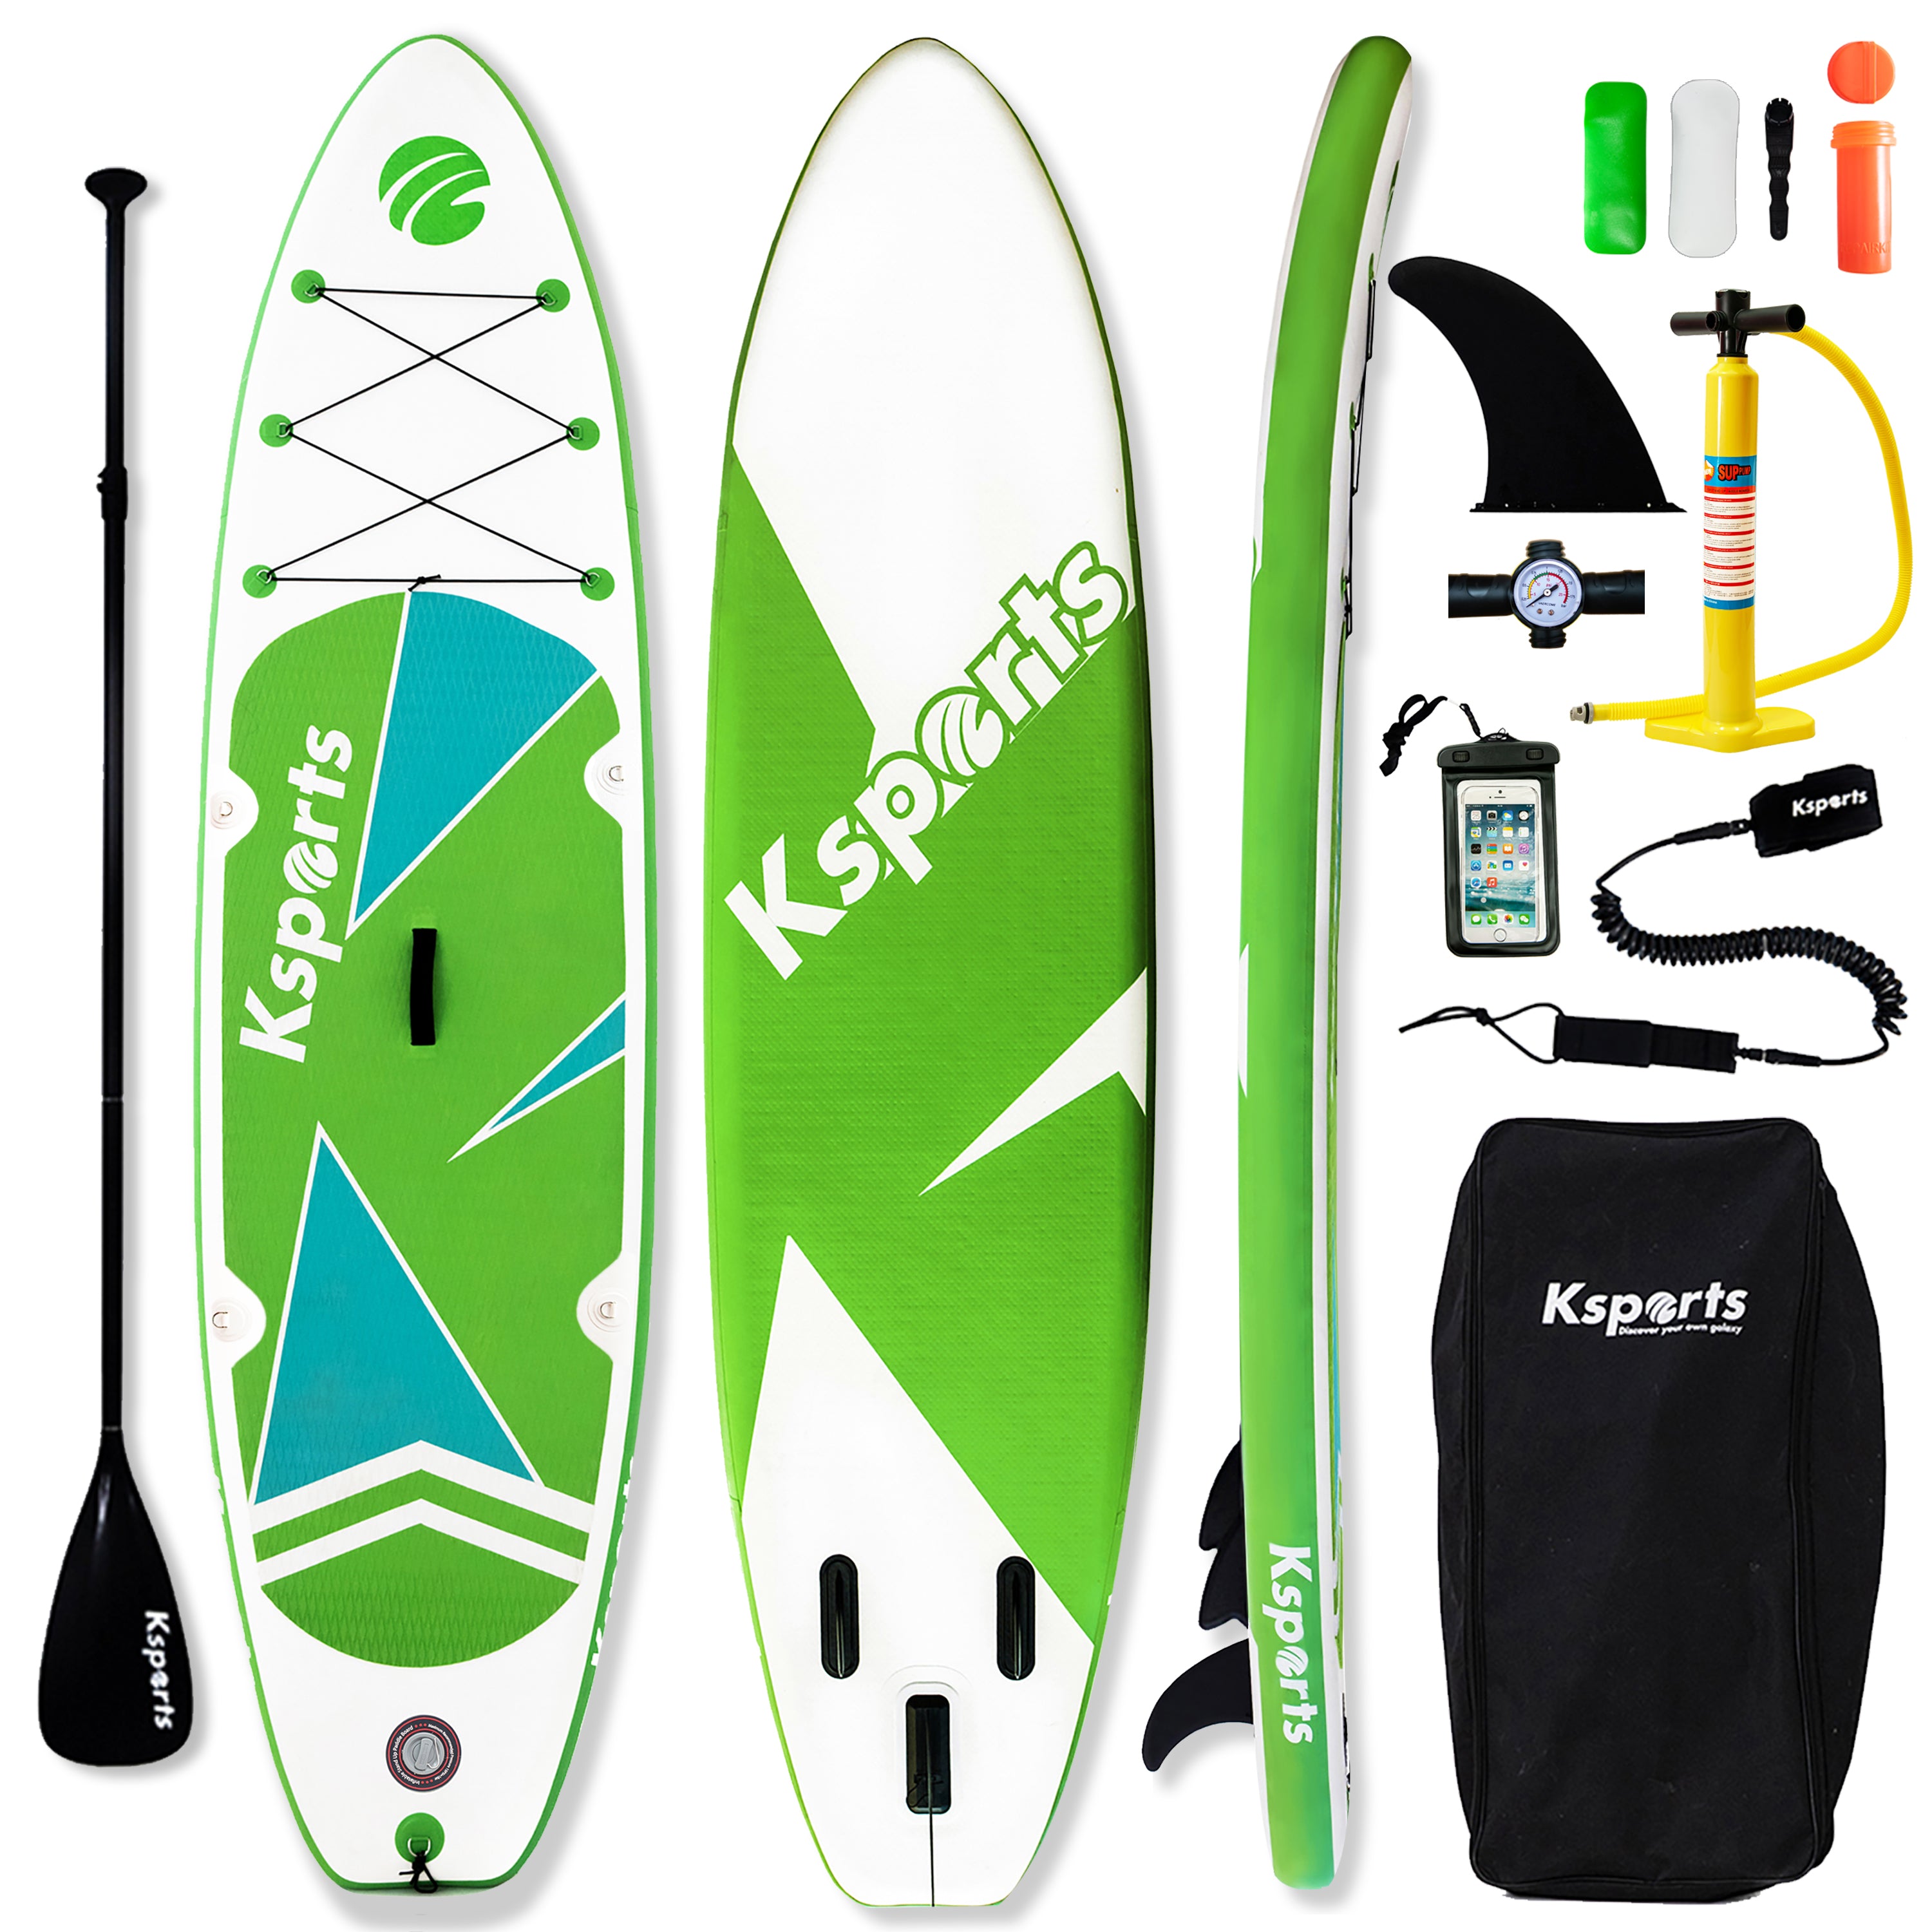 Ksports Inflatable Stand Up Paddle Board Green (10.6ftⅹ32inⅹ6in)